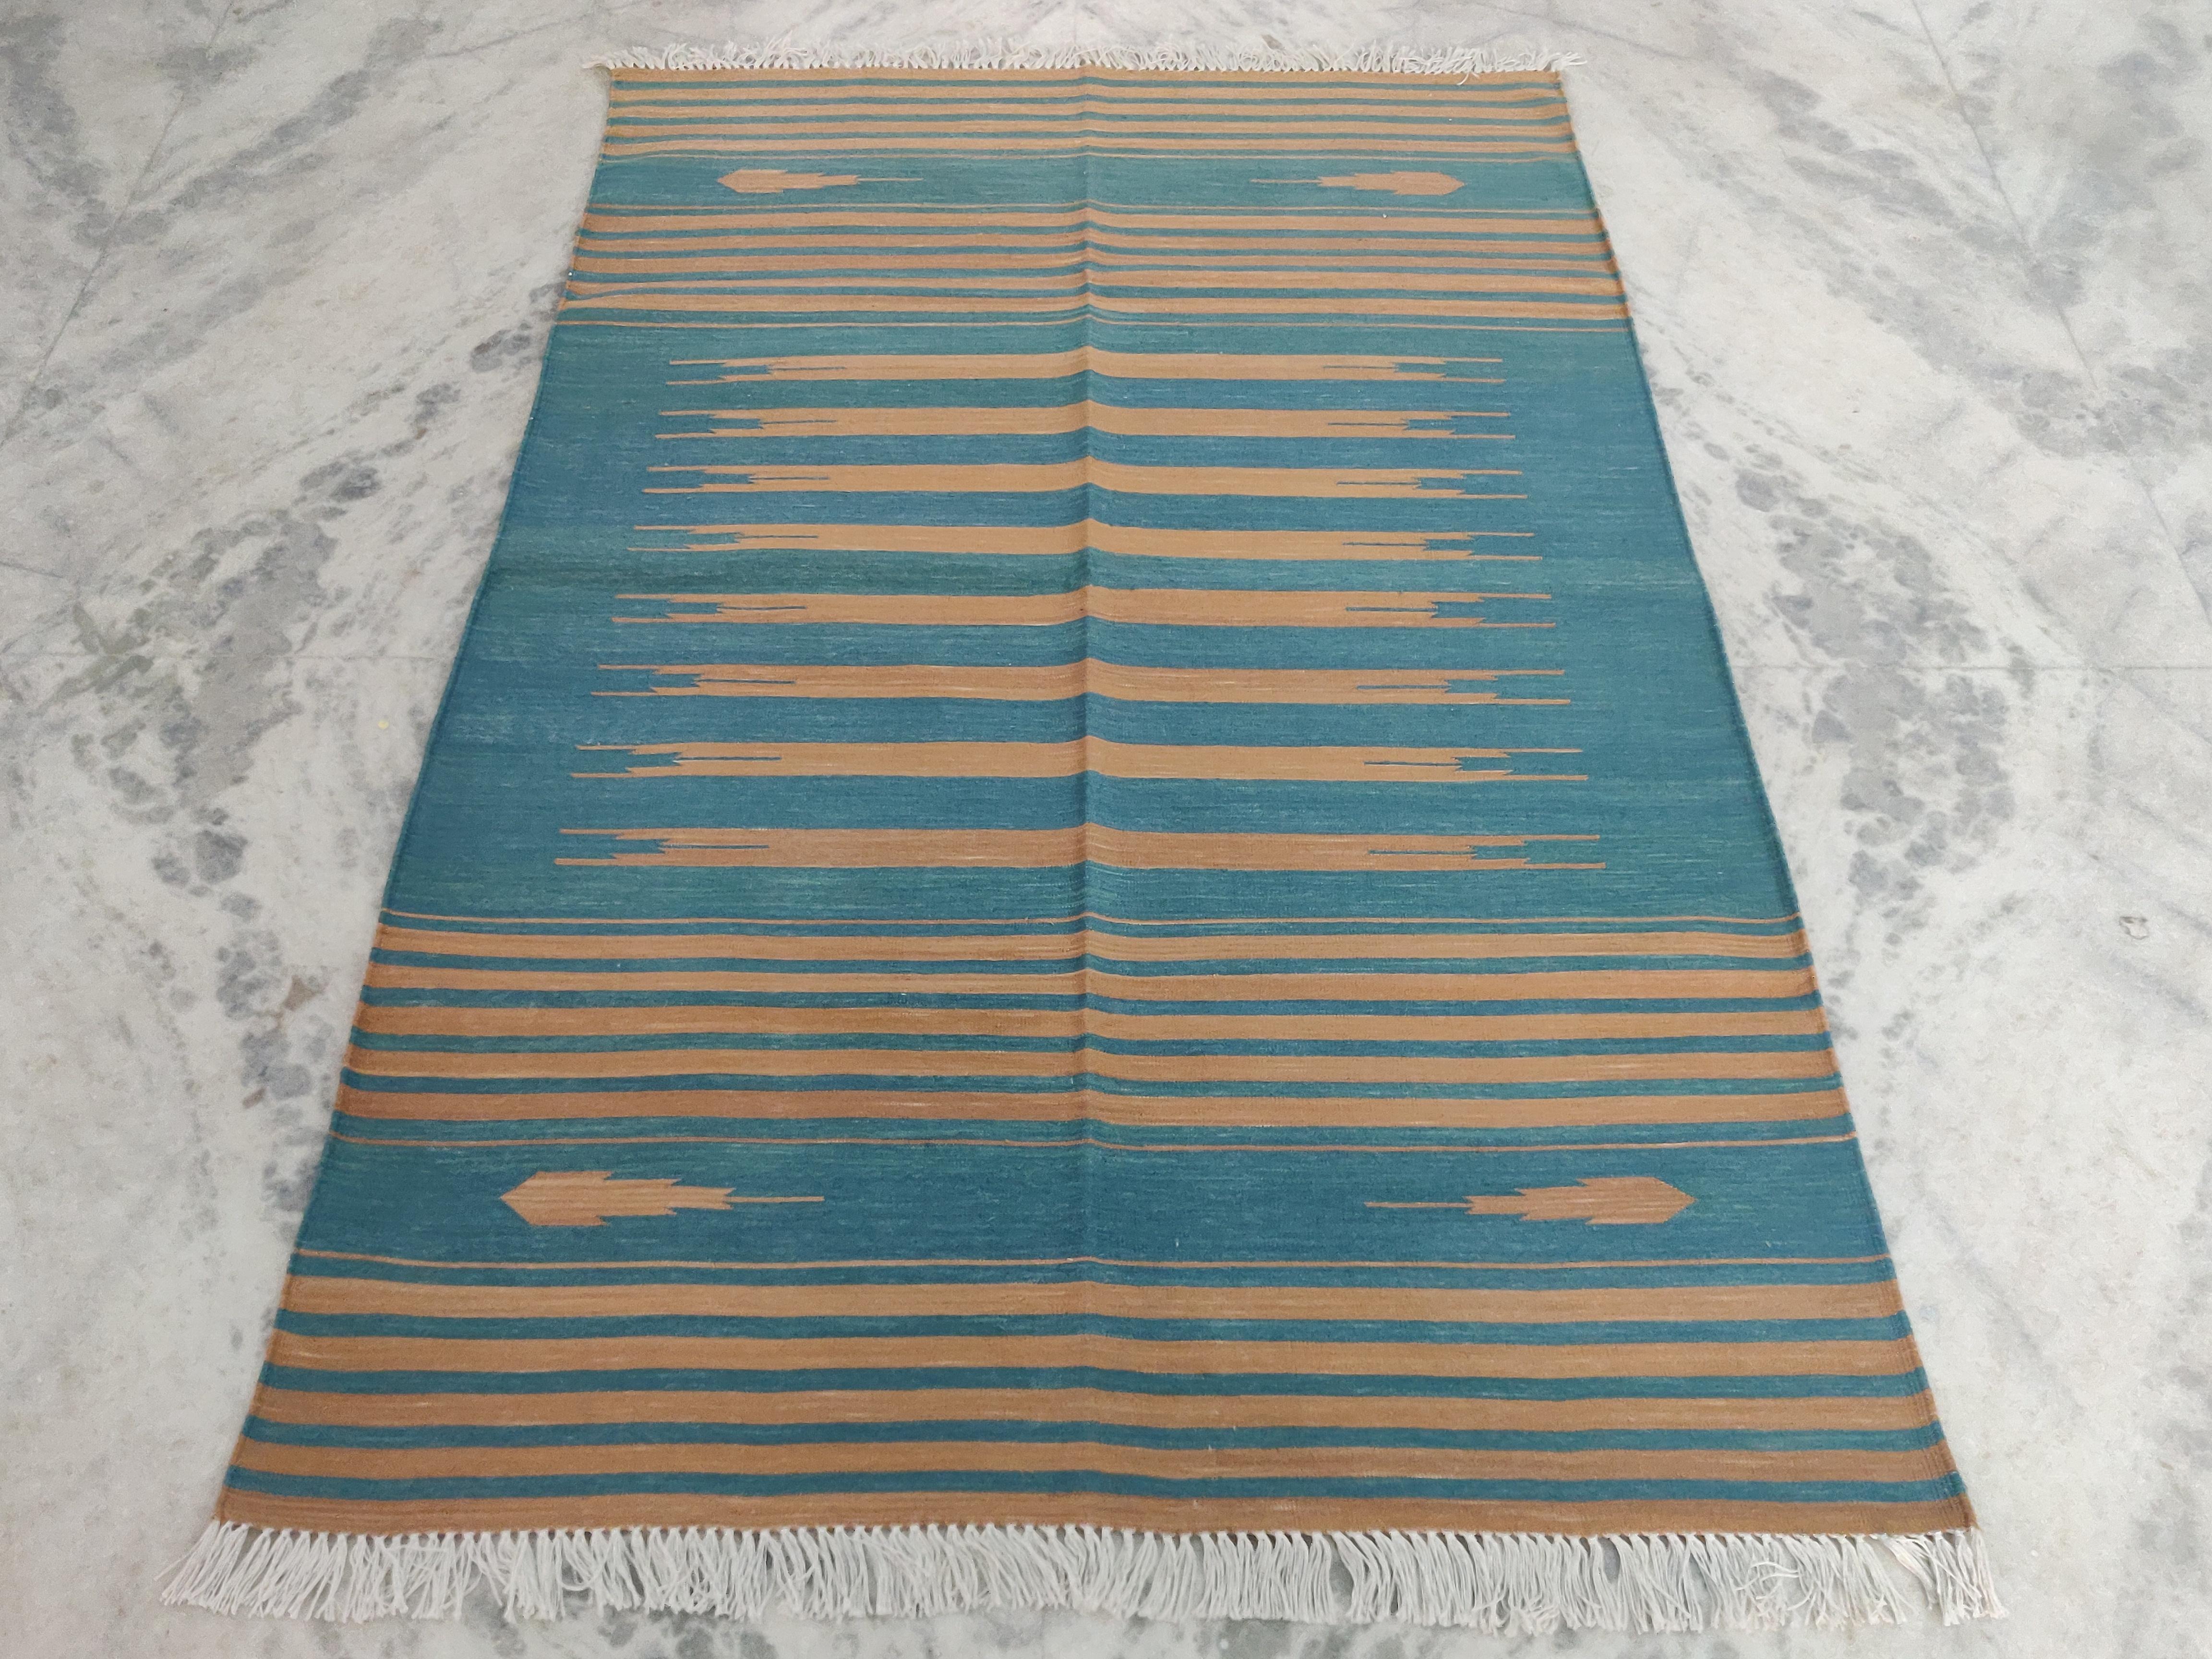 Cotton Vegetable Dyed Green And Brown Striped Indian Dhurrie Rug-4'x6' 

These special flat-weave dhurries are hand-woven with 15 ply 100% cotton yarn. Due to the special manufacturing techniques used to create our rugs, the size and color of each